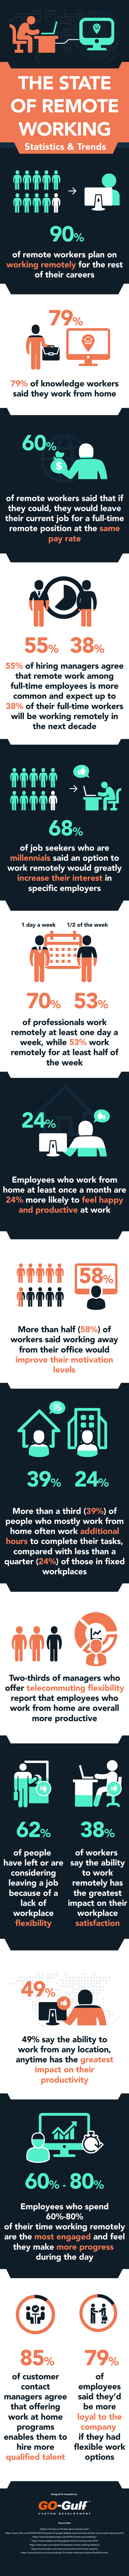 Remote Work is Here to Stay and Here is Why [Infographic] | DeviceDaily.com